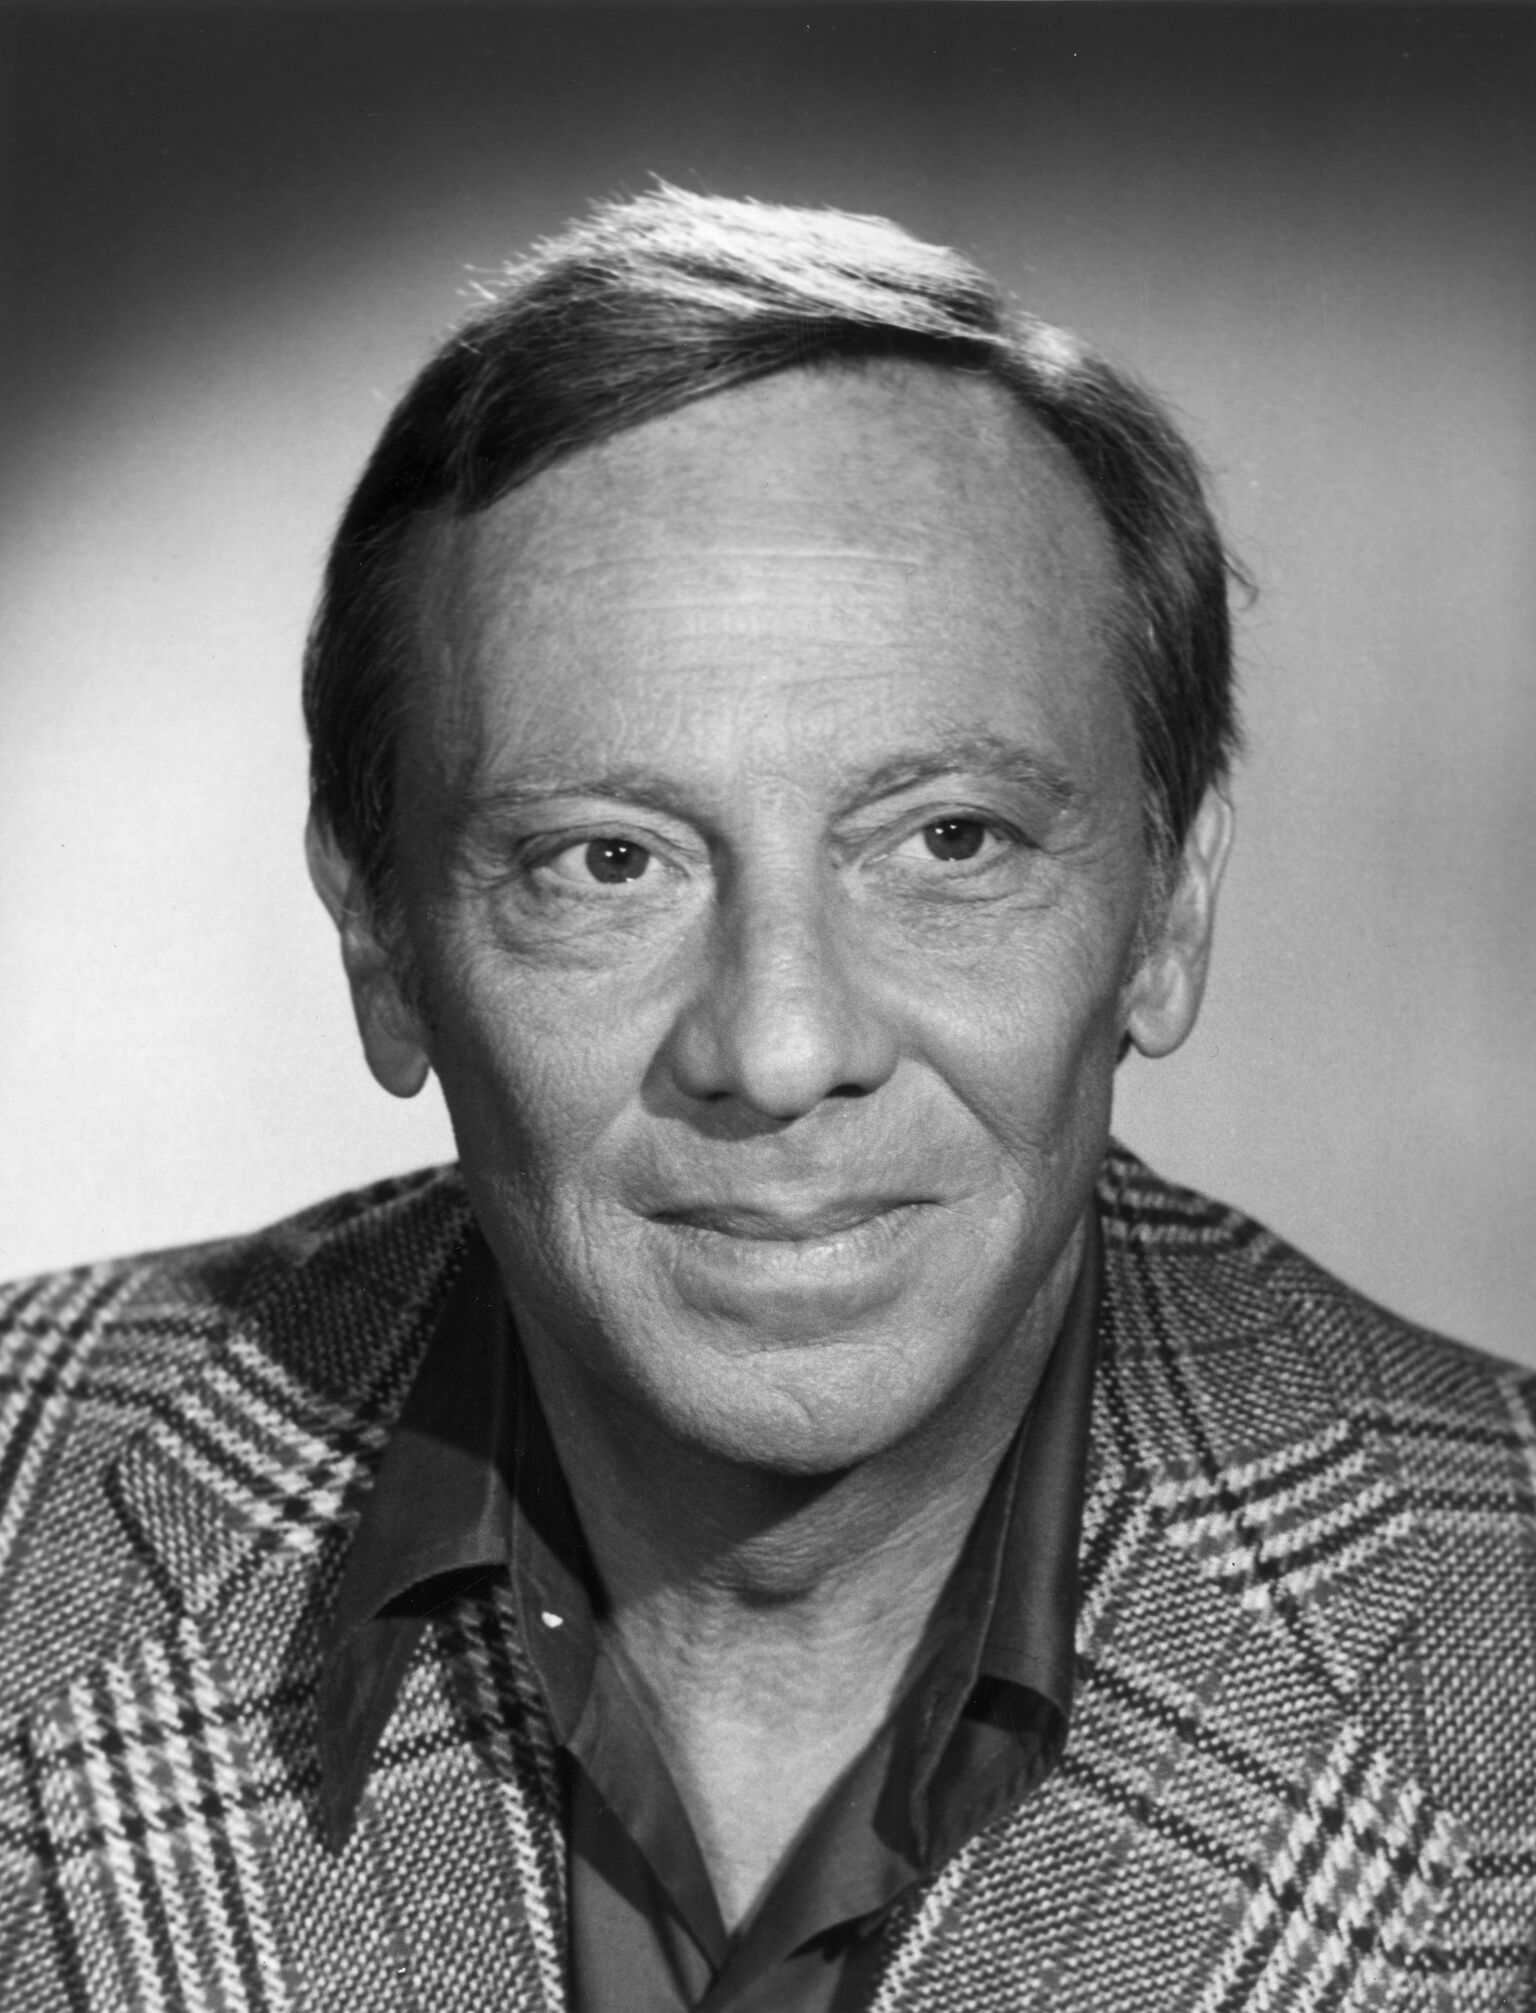 Studio headshot portrait of American actor Norman Fell (1924-1998), wearing a houndstooth blazer. | Getty Images